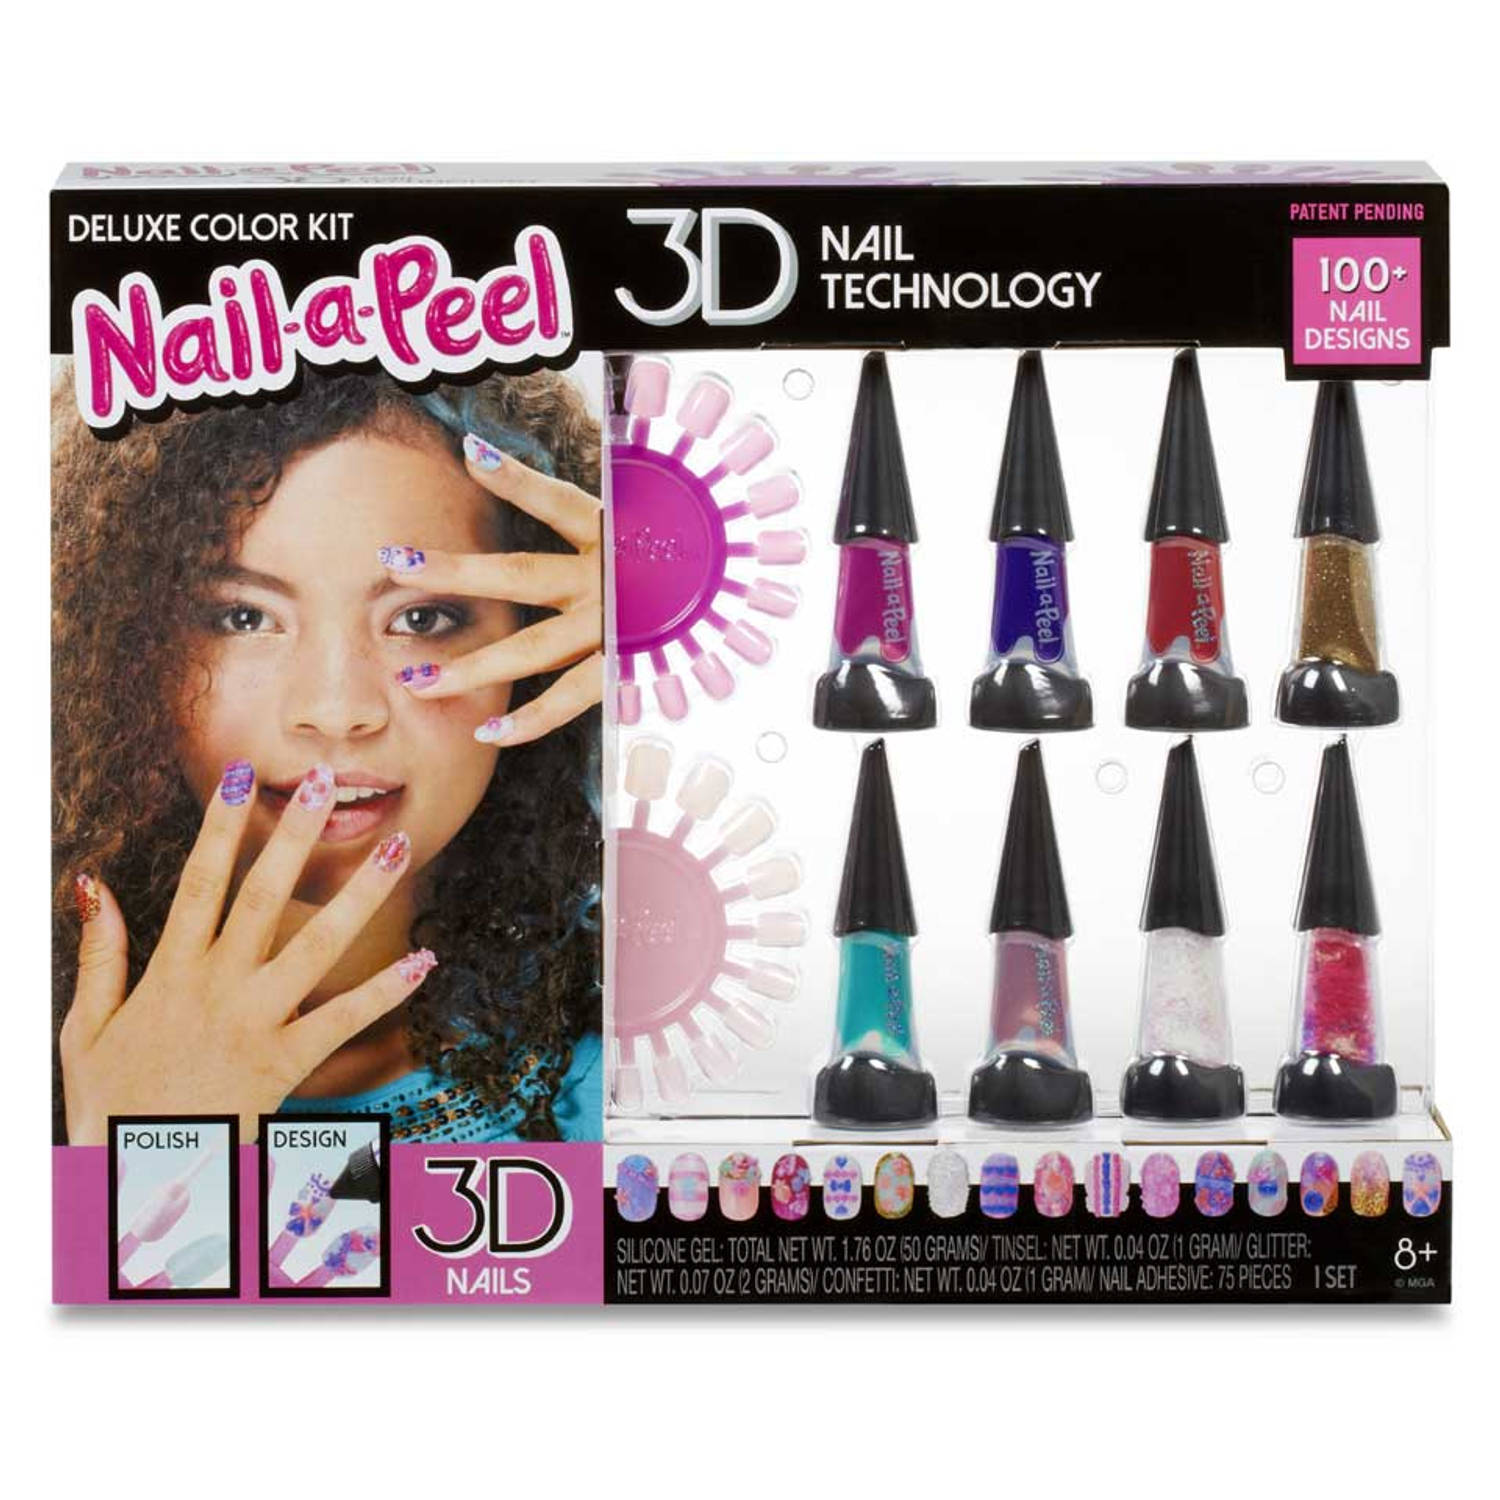 Nail-a-peel Deluxe Color Kit